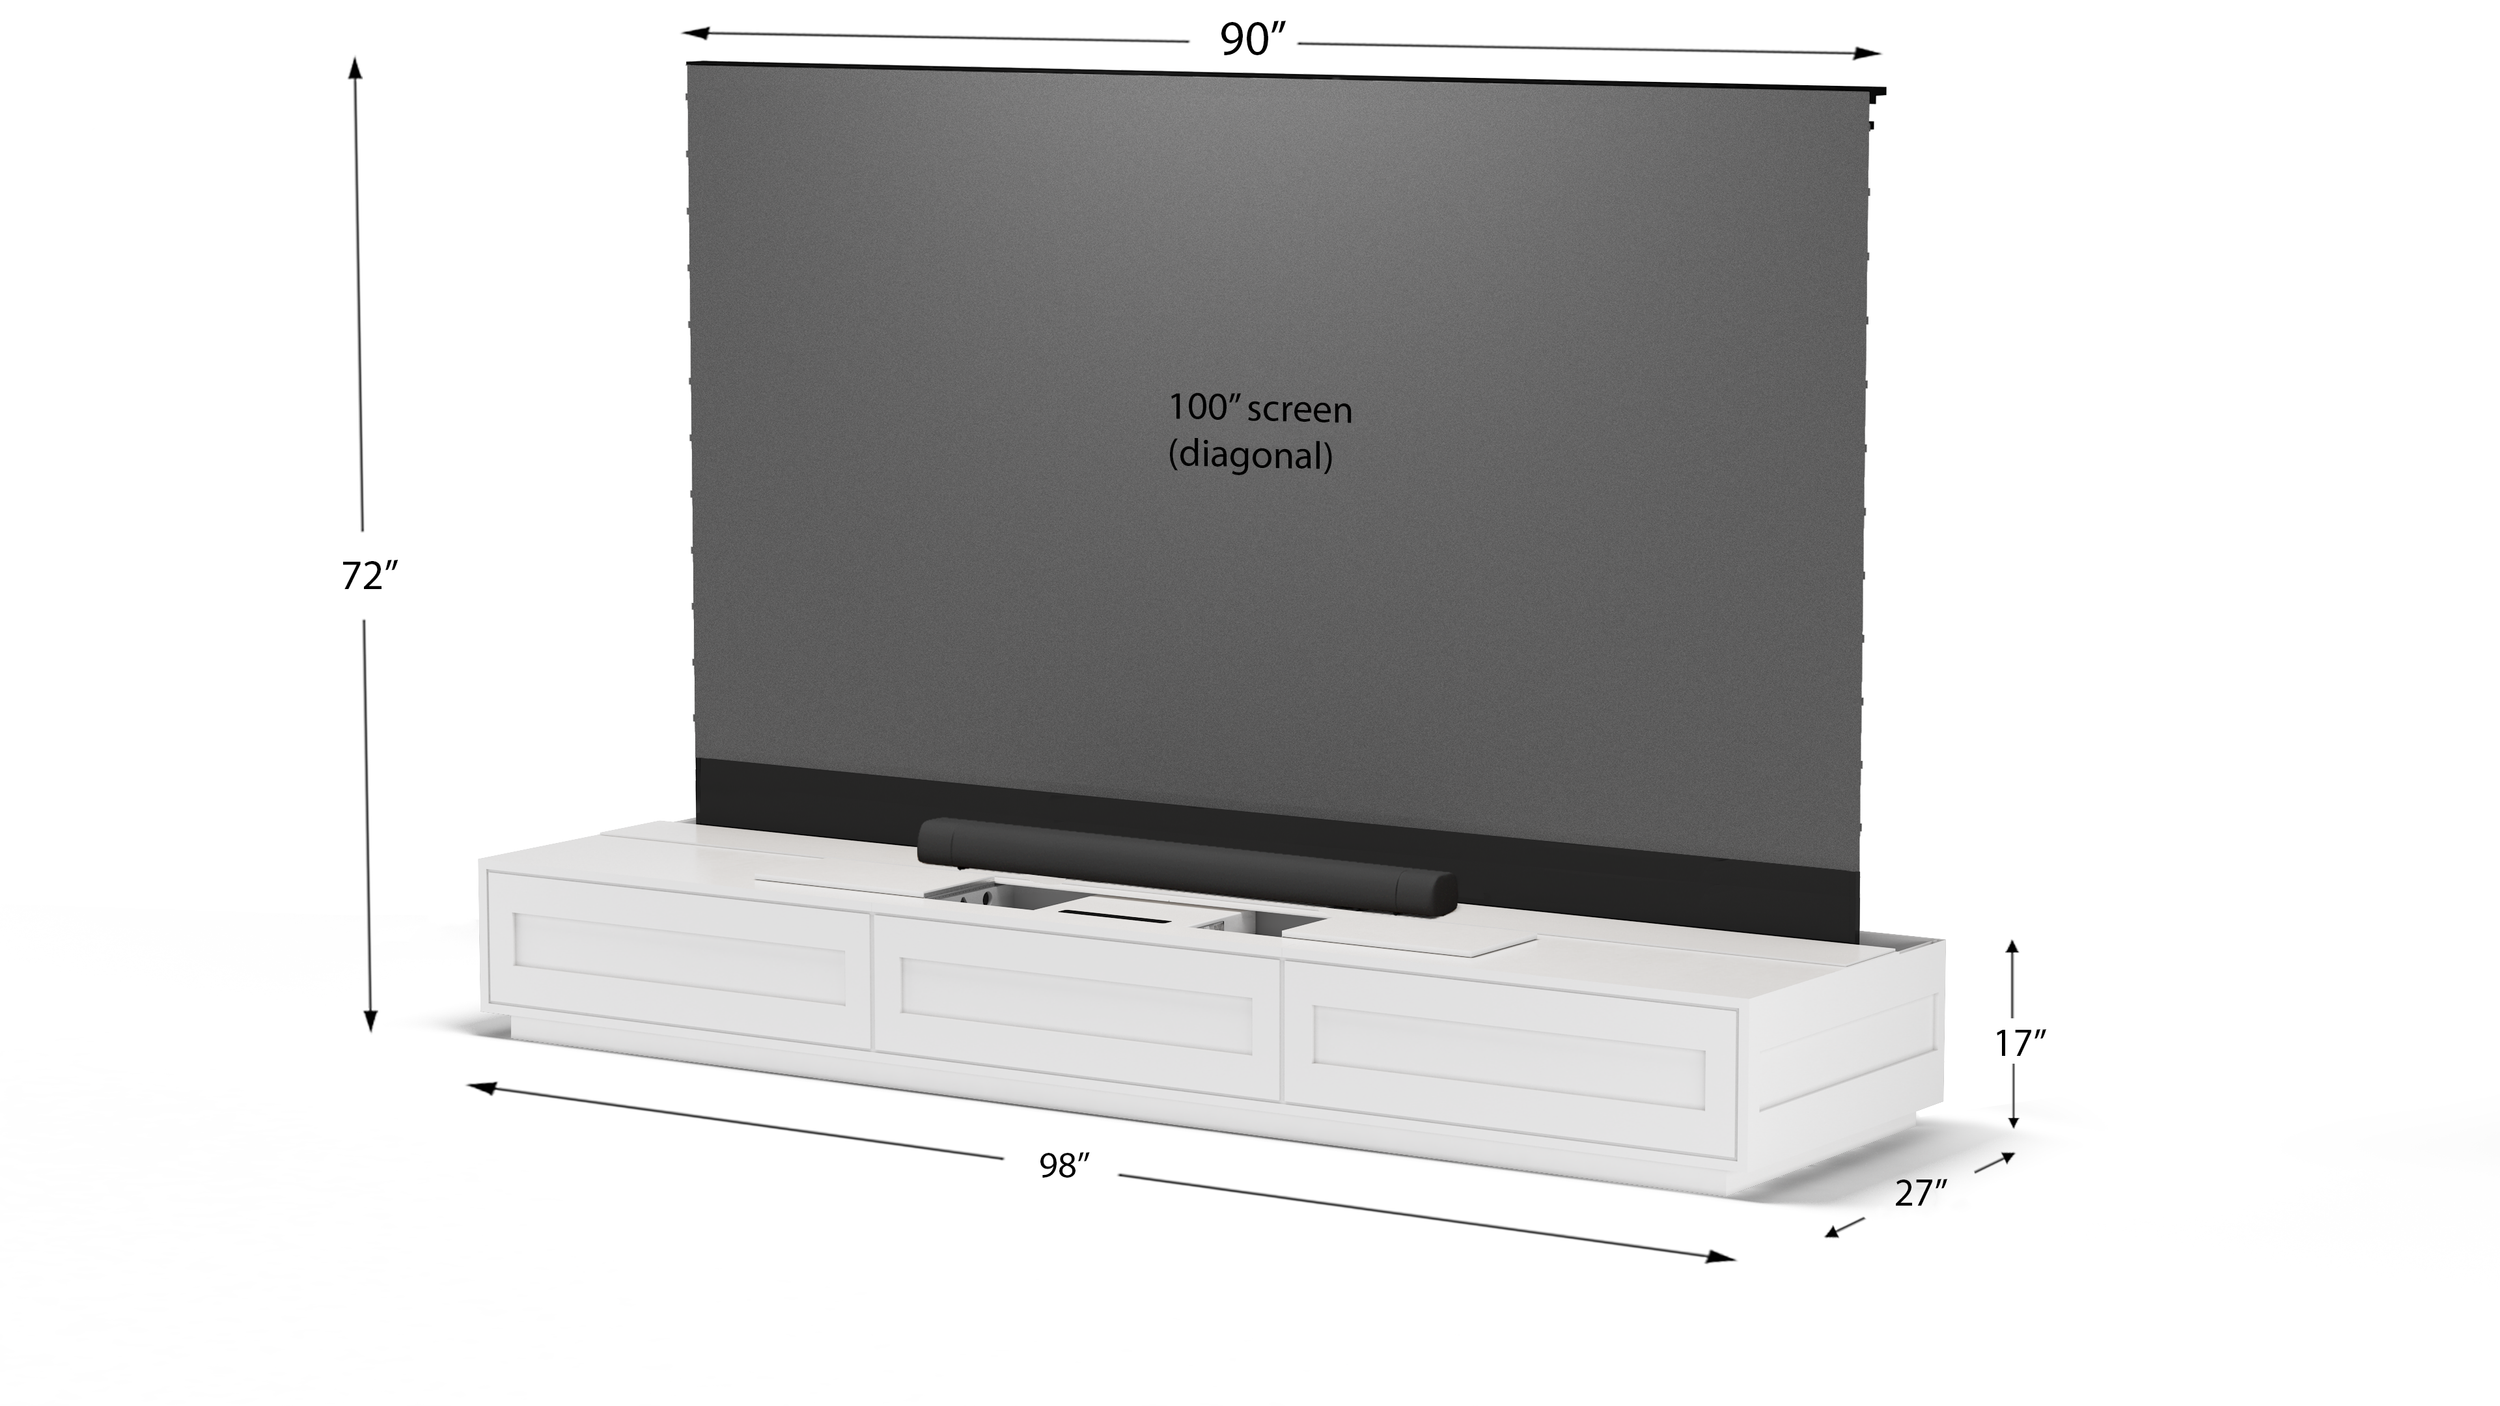 Render Dimensions 100 inch screen (1).png